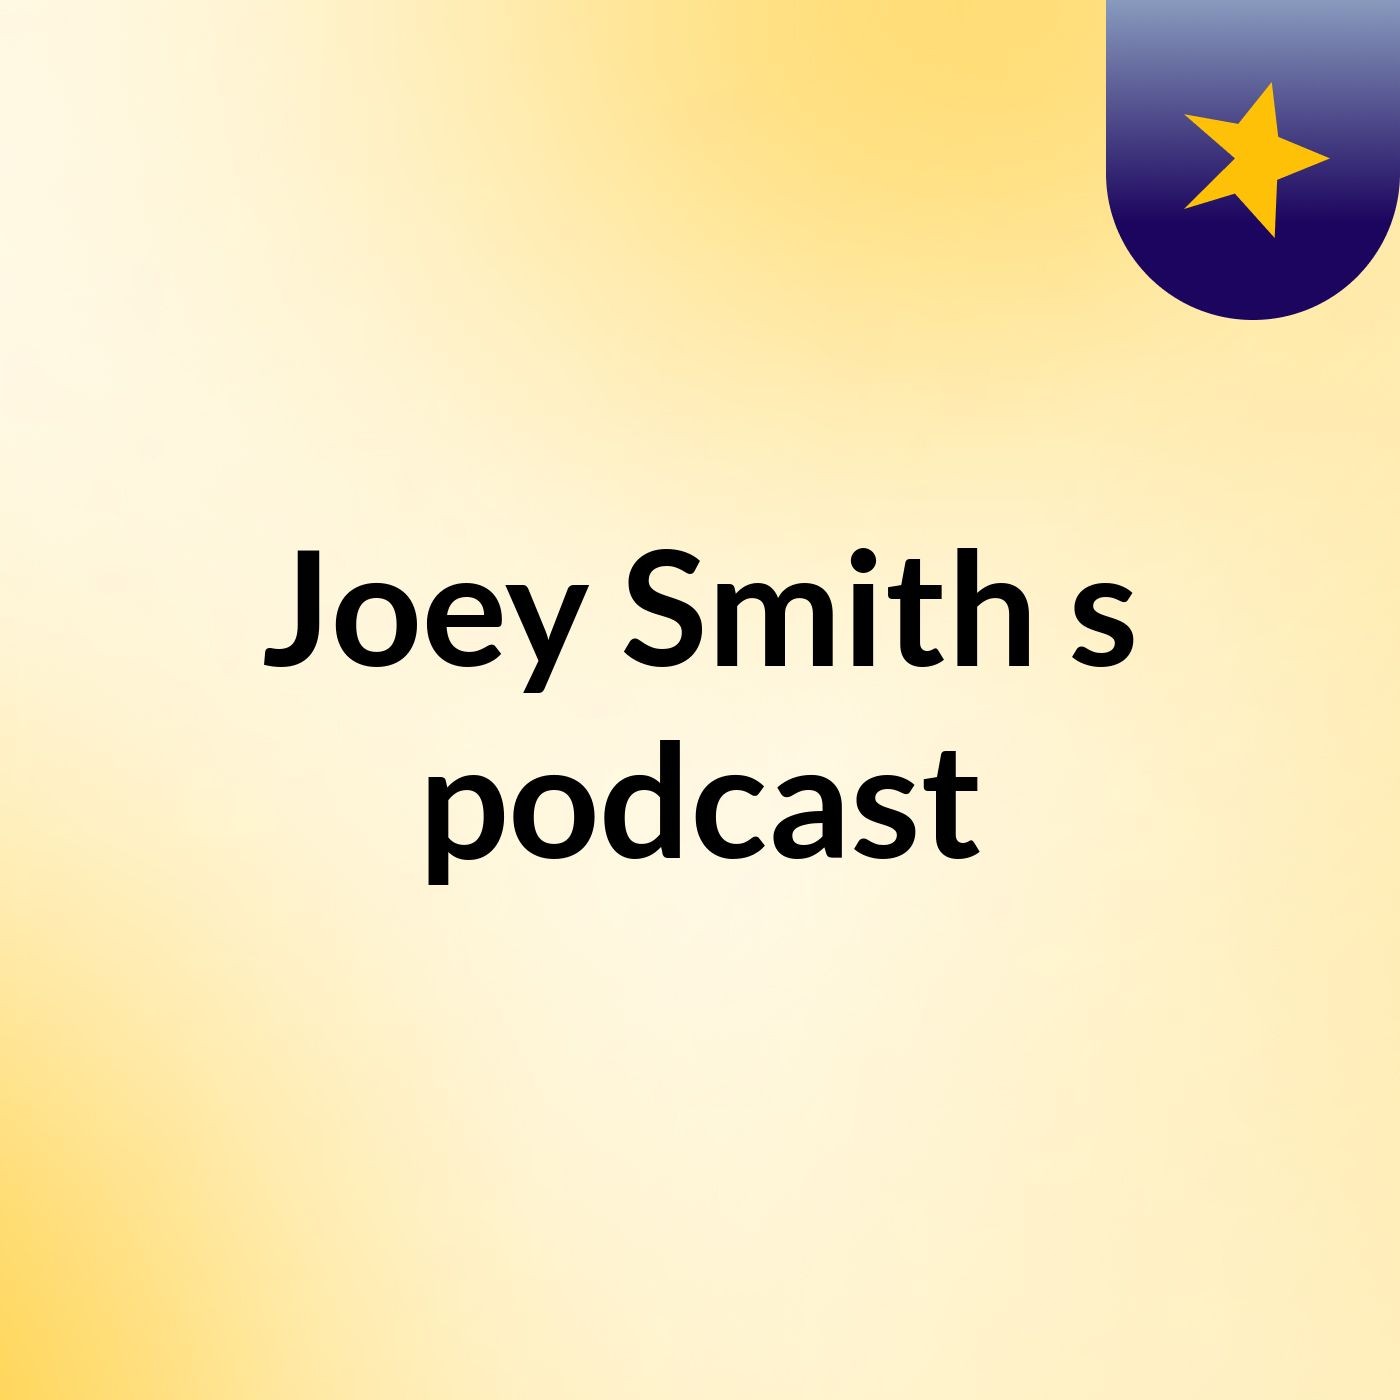 Episode 5 - Joey Smith's podcast